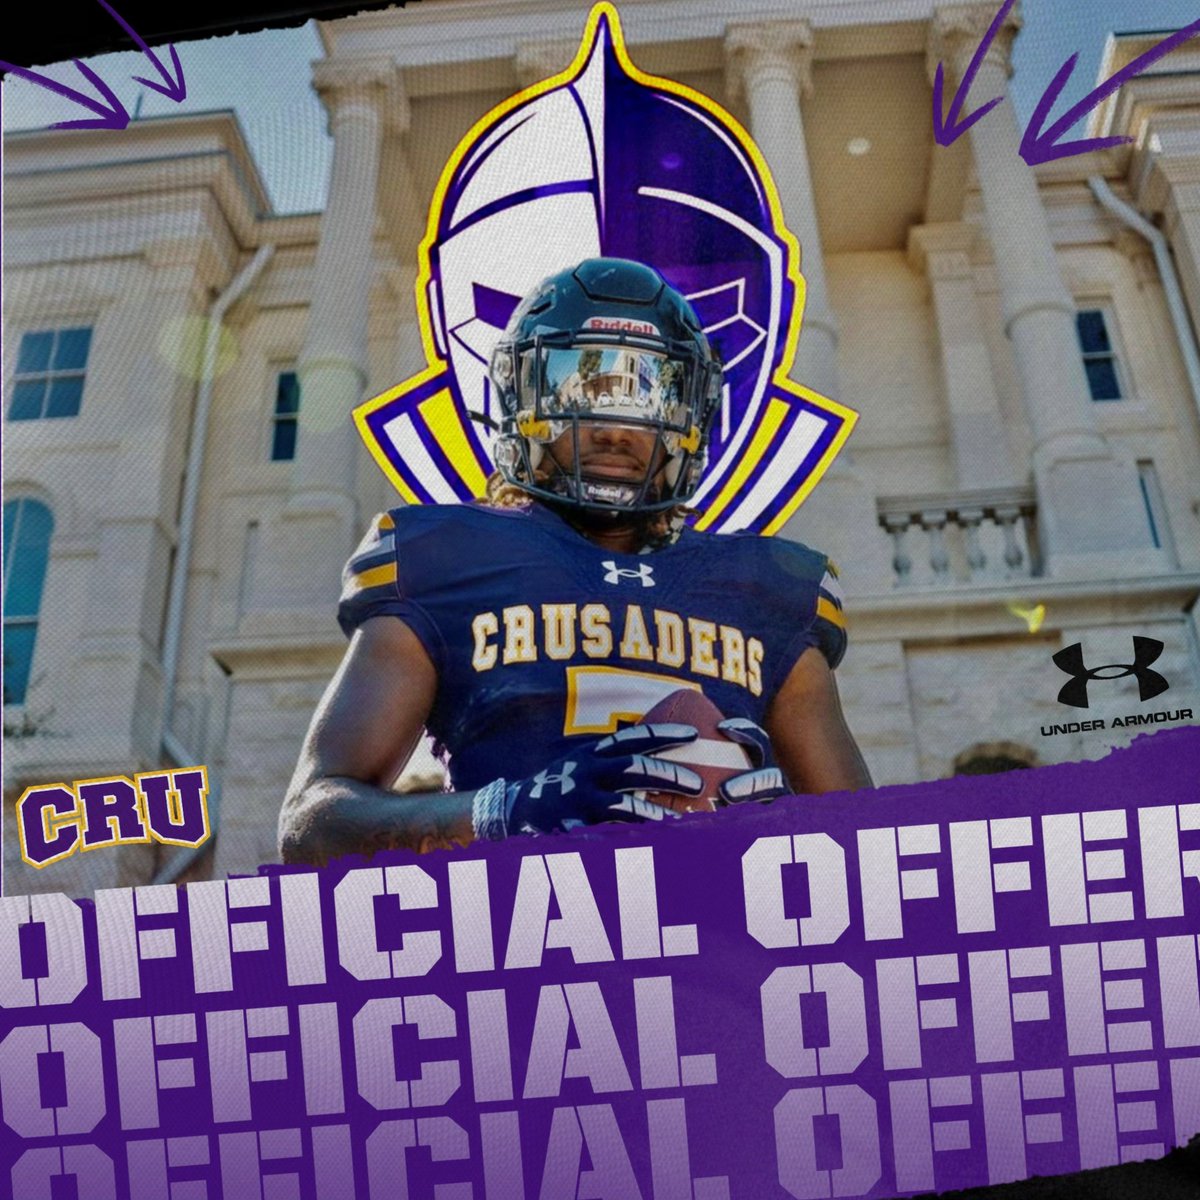 after a great conversation with @Coach_Brace i am extremely blessed to receive an offer from University of Mary Hardin-Baylor! @Coach_Kraus @GlennGrizFB @reelgoatsports @Dbtechnician777 @Prep2Play @TopShelf_Tizzy